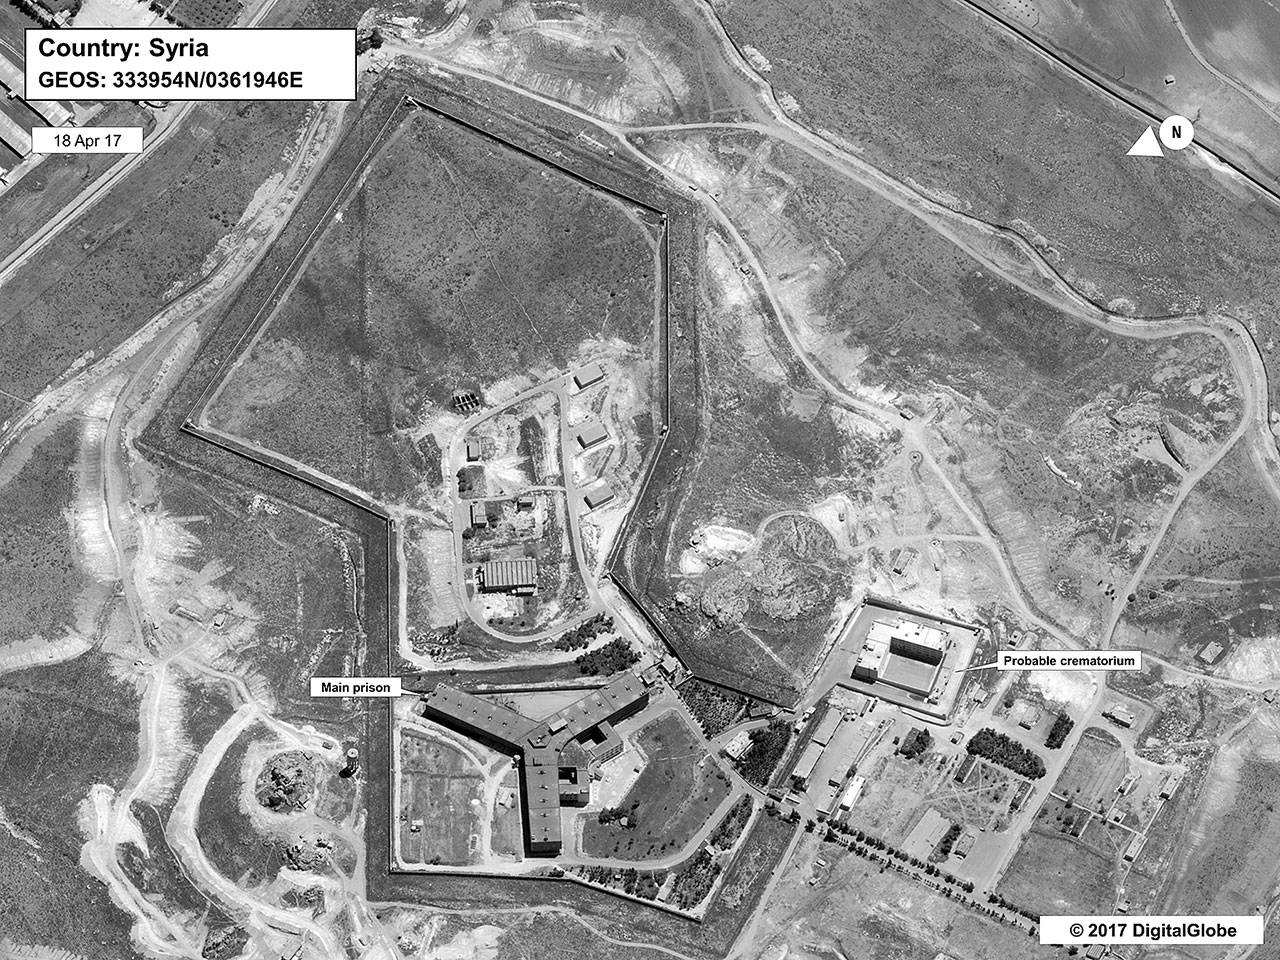 This April 18 satellite image shows what the State Department described as a building in a prison complex in Syria that was modified to support a crematorium. (State Department/DigitalGlobe via AP)